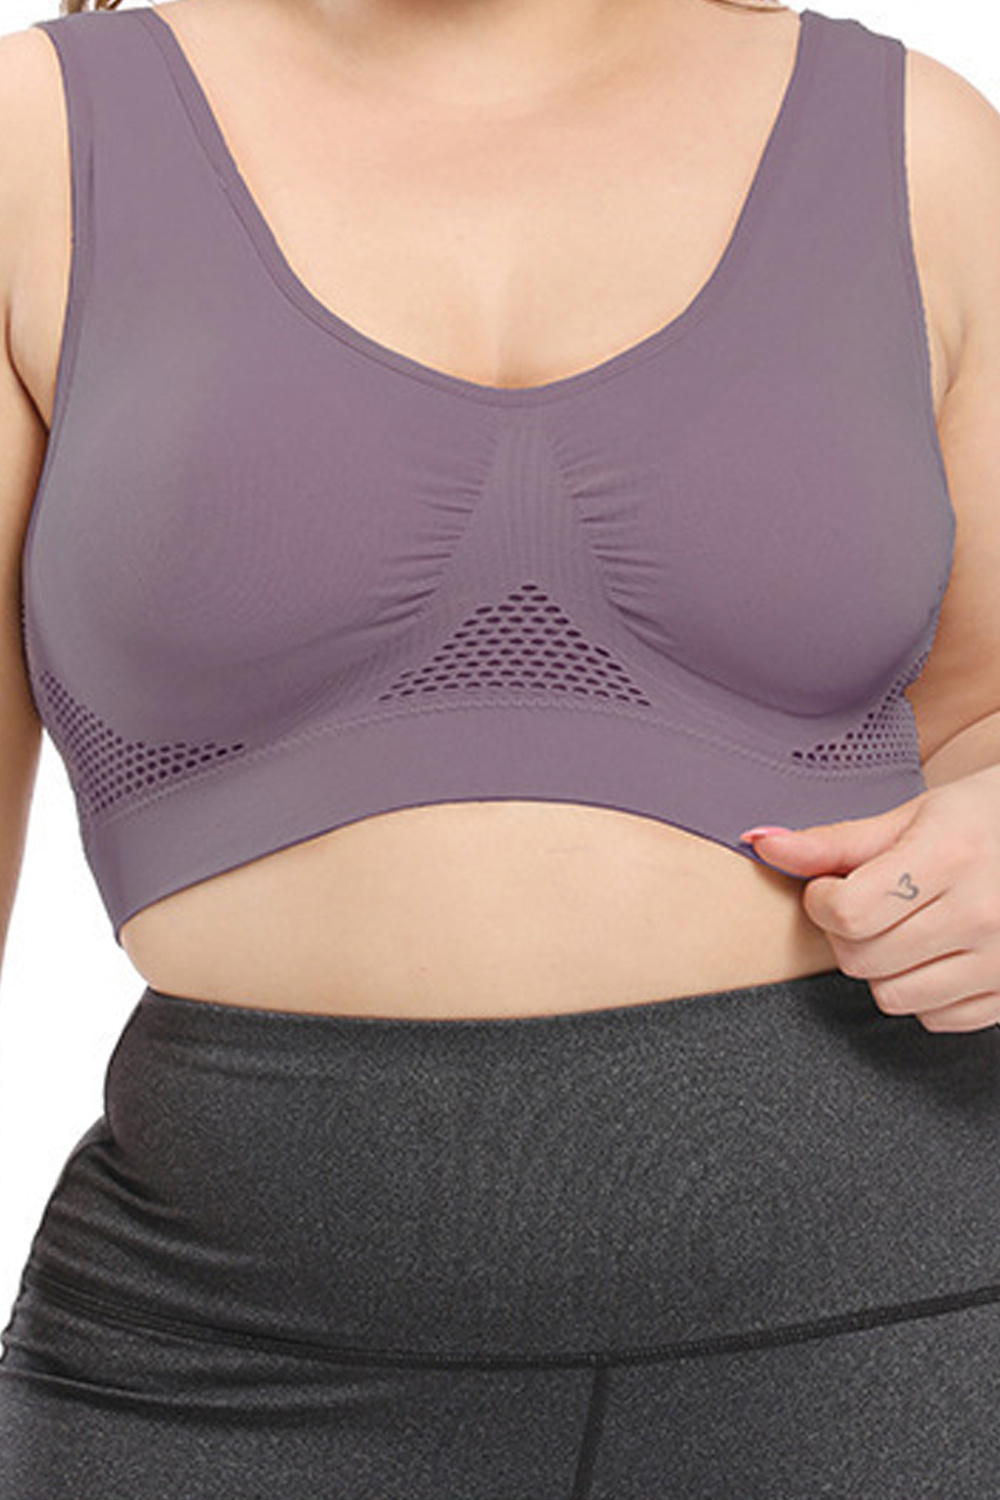 Sports Bras: Buy Sports Bras in Clothing at Kmart